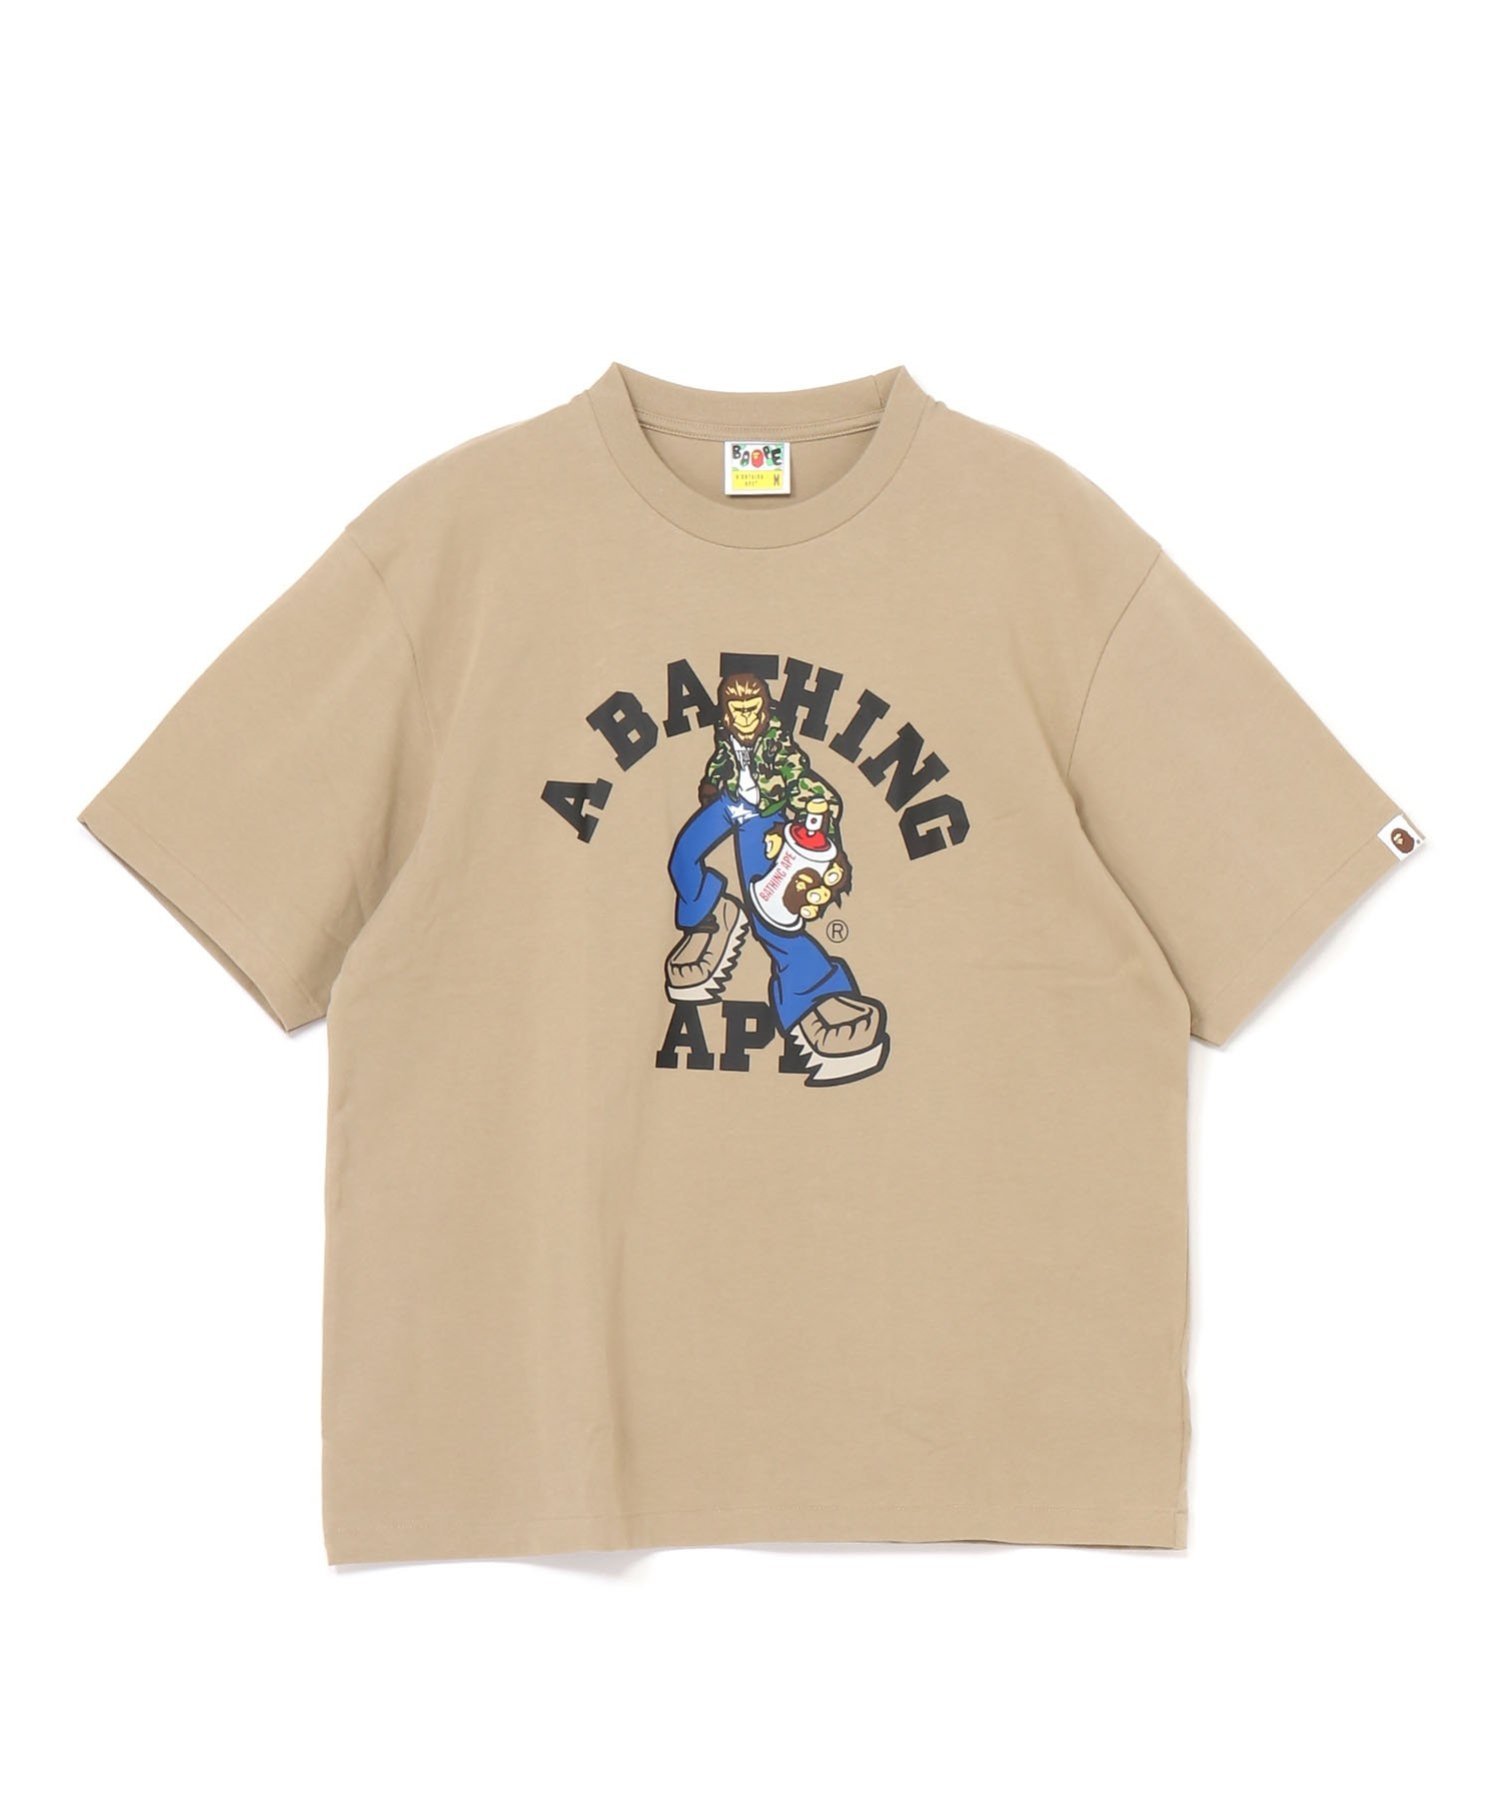 A BATHING APE GRAFFITI CHARACTER COLLEGE RELAXED FIT TEE ア ベイシング エイプ トップス カットソー・Tシャツ ベージュ ブラック グレー【送料無料】